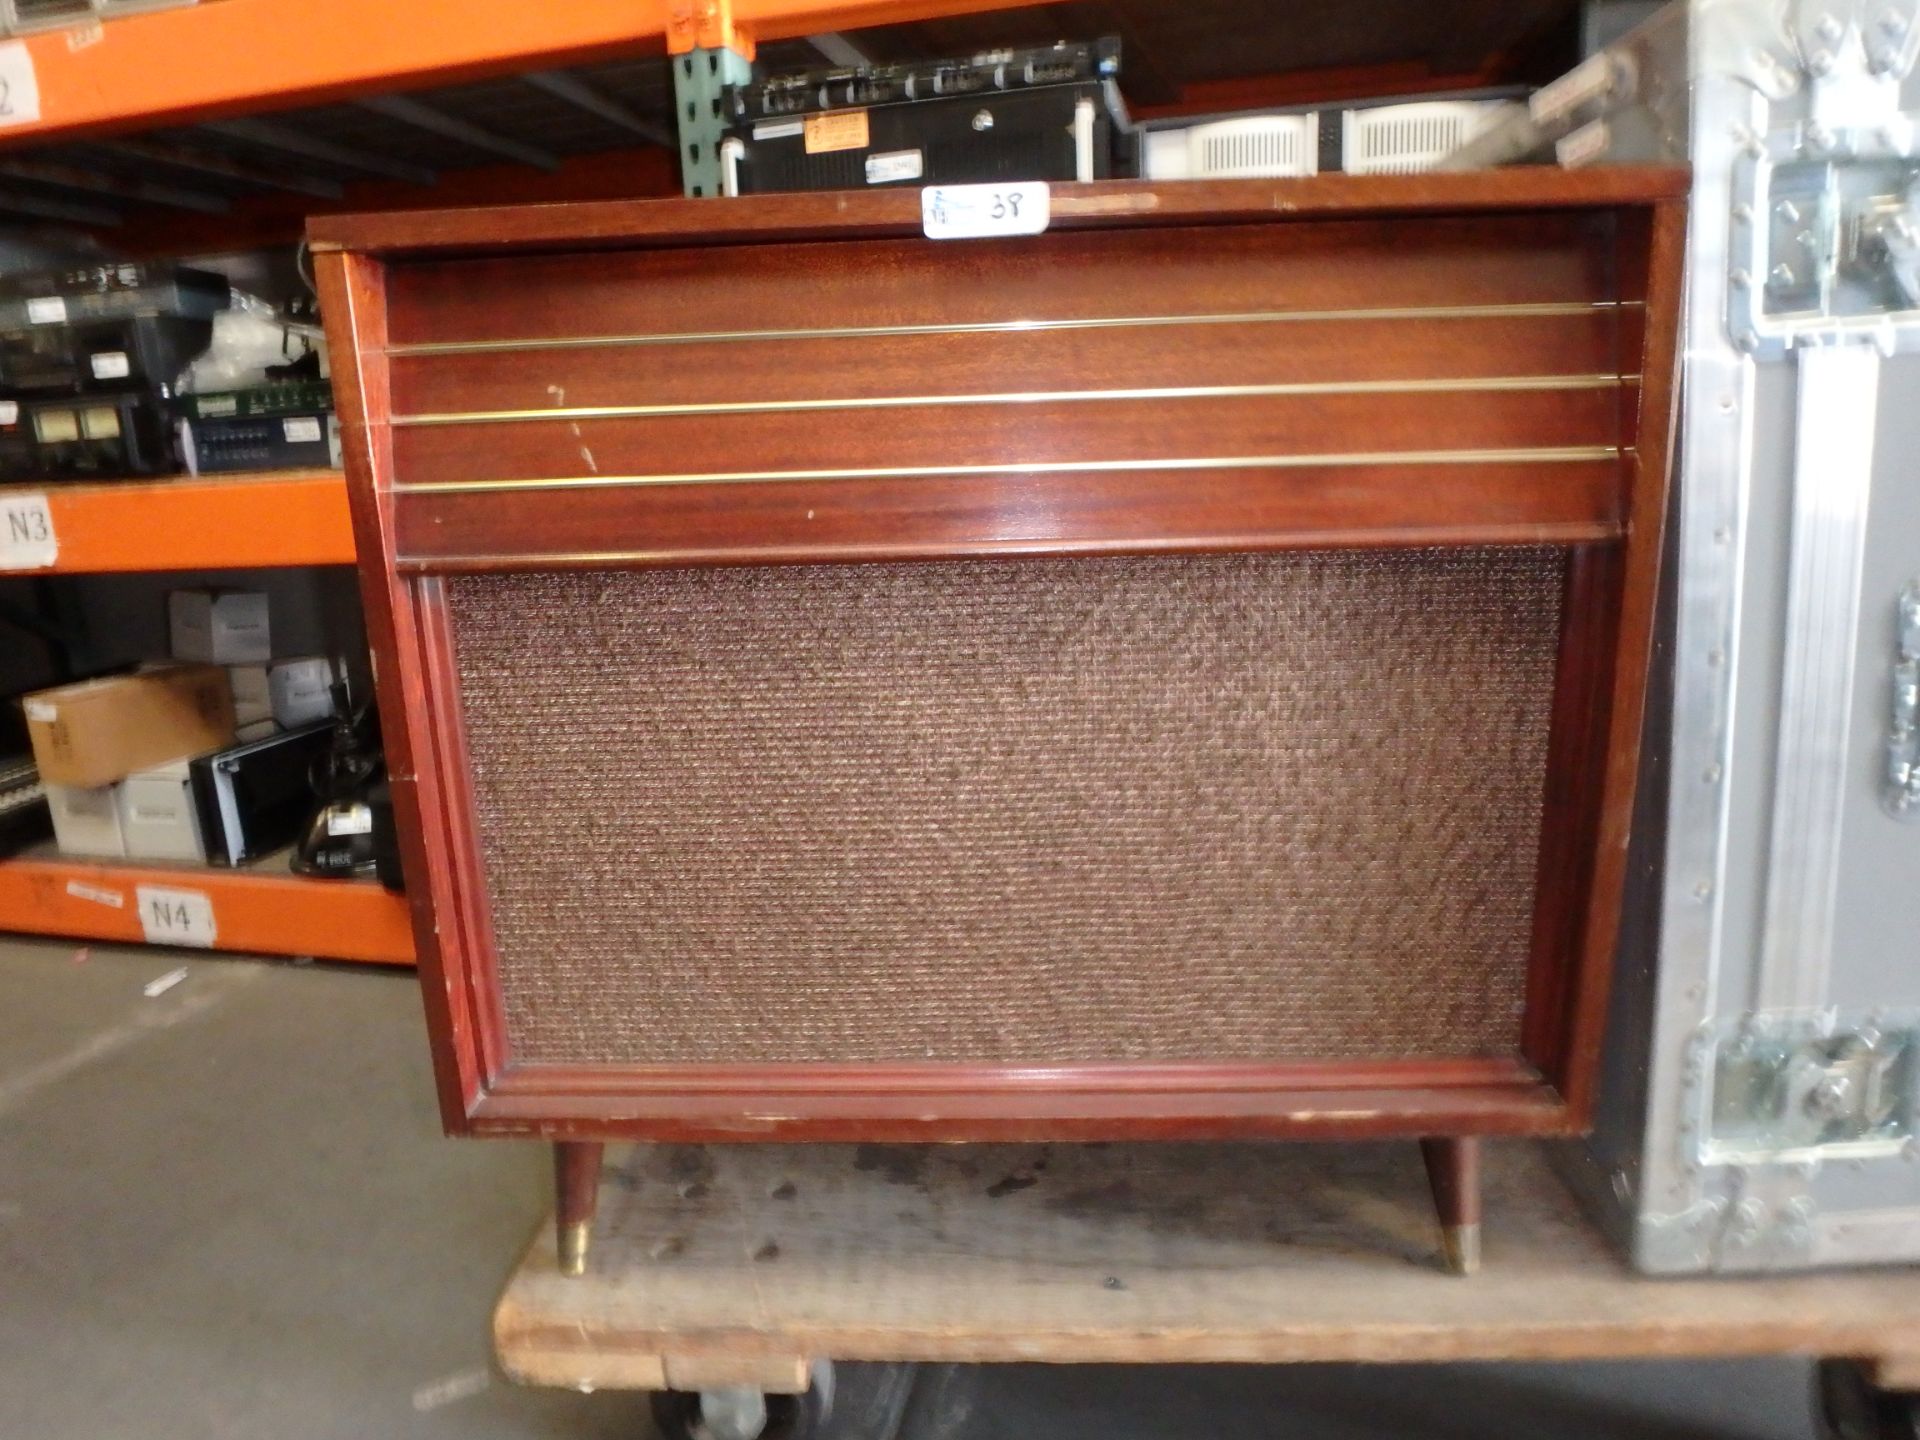 VINTAGE FISHER SYMPHONIC STEREO CABINET